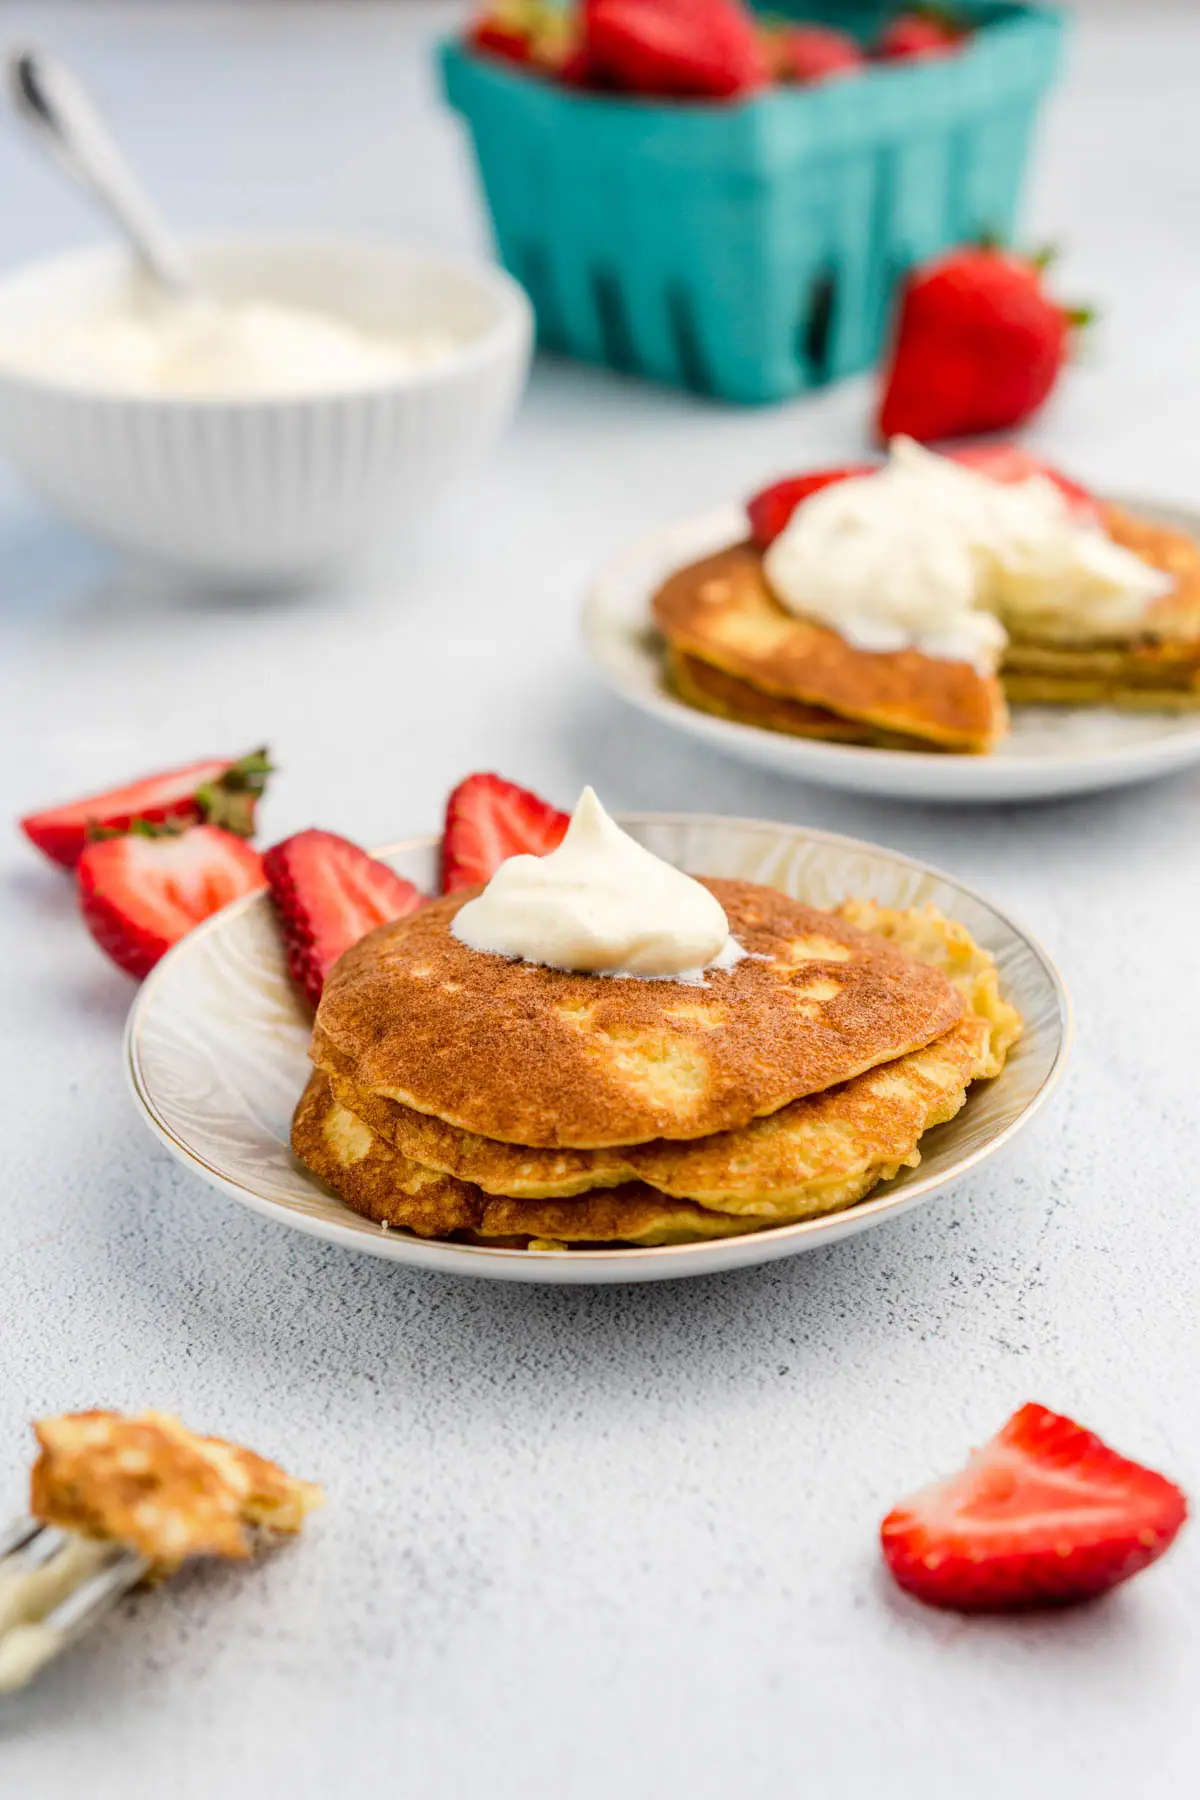 Pancakes topped with whipped cream and strawberries on plates near basket of fruit and bowl of whipped cream.